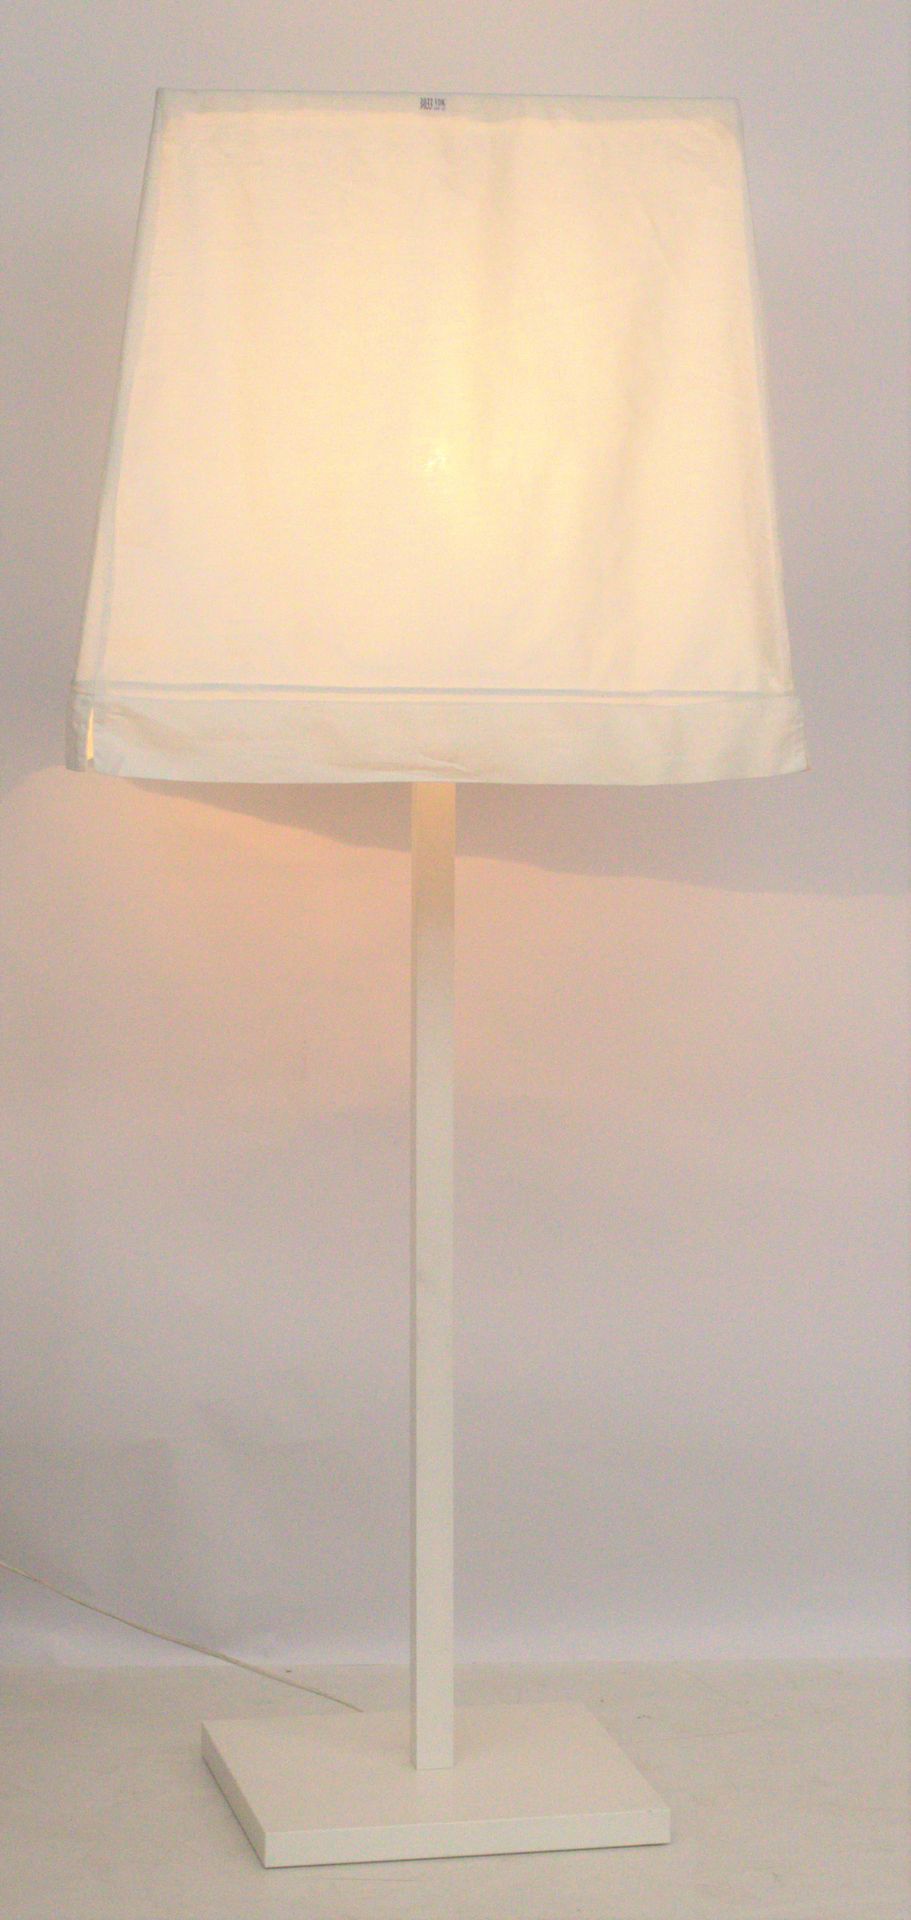 Null Floor lamp with square wooden base (from "INSTORE")